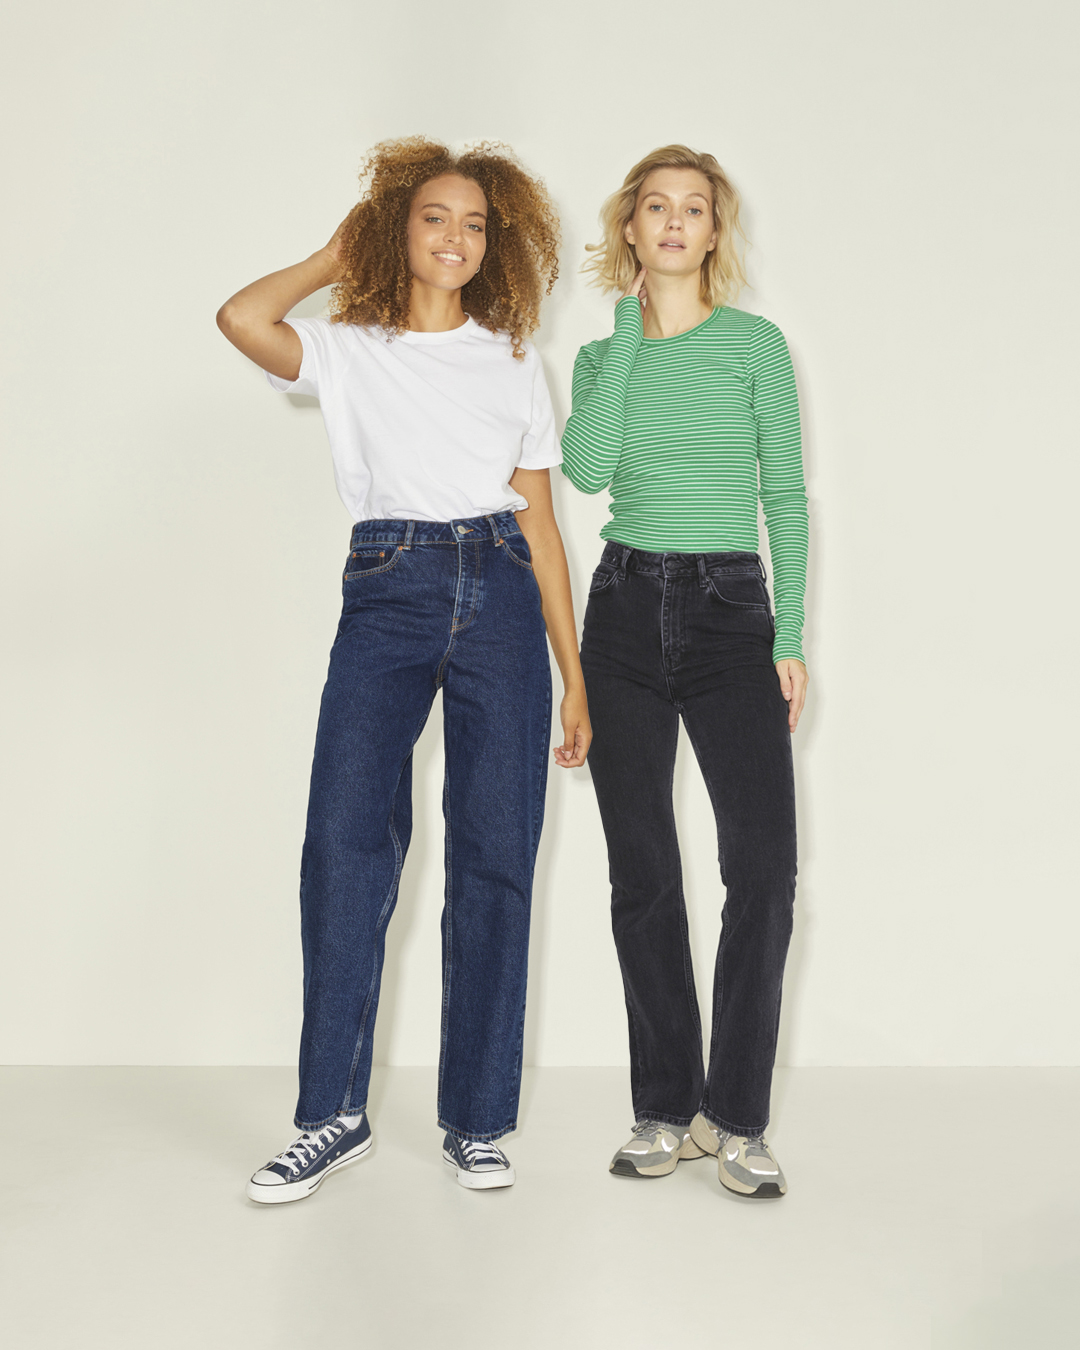 Two women show off their outfits from Hudson's Bay. One woman wears a white shirt and jeans. The other woman wears a green long sleeve and black jeans.